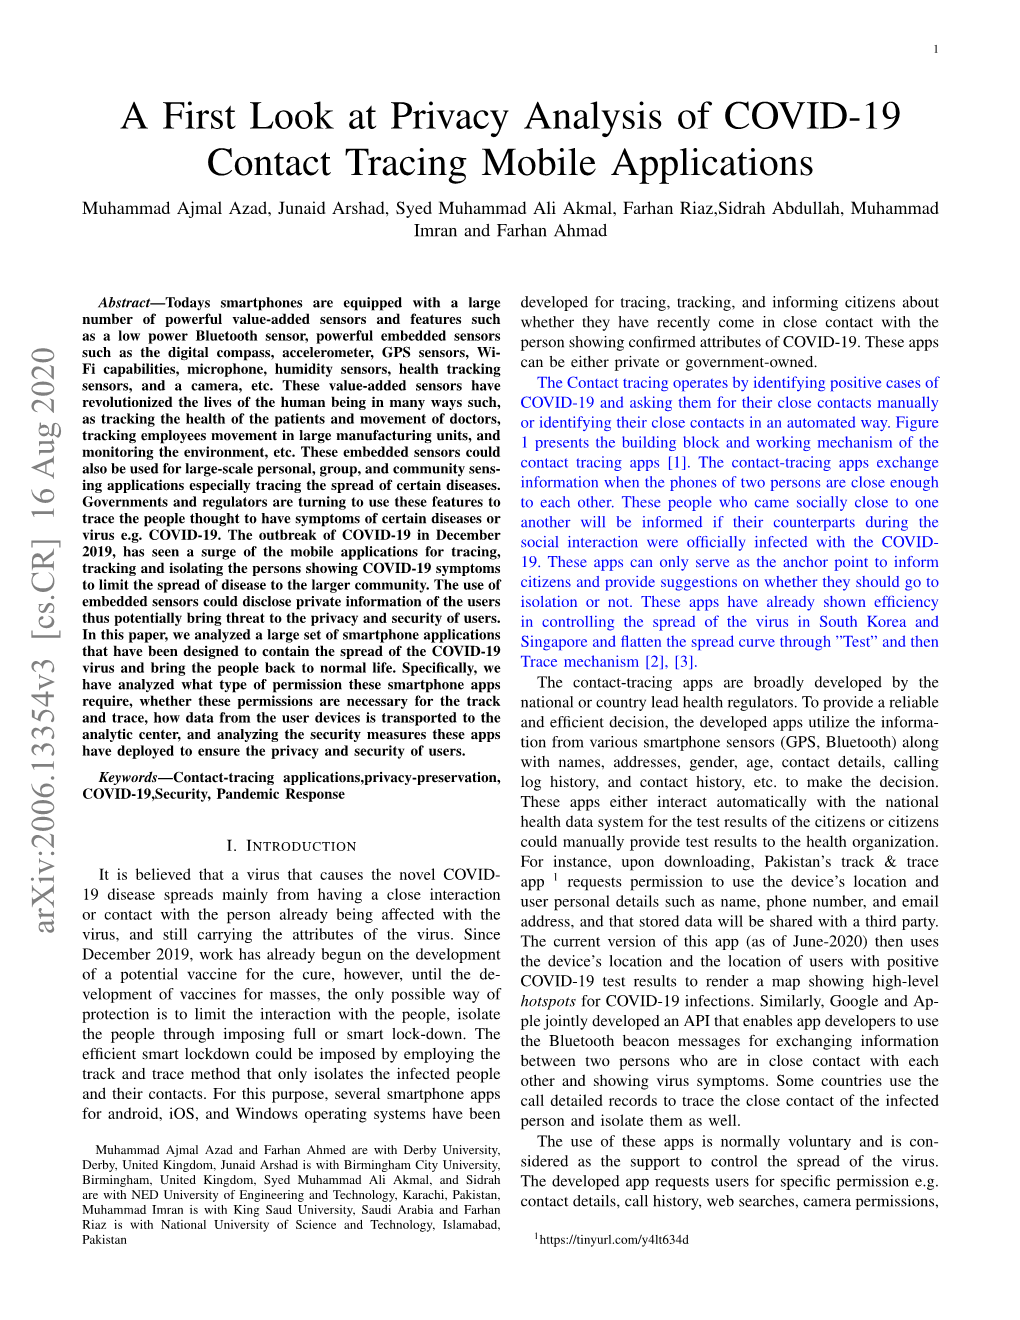 A First Look at Privacy Analysis of COVID-19 Contact Tracing Mobile